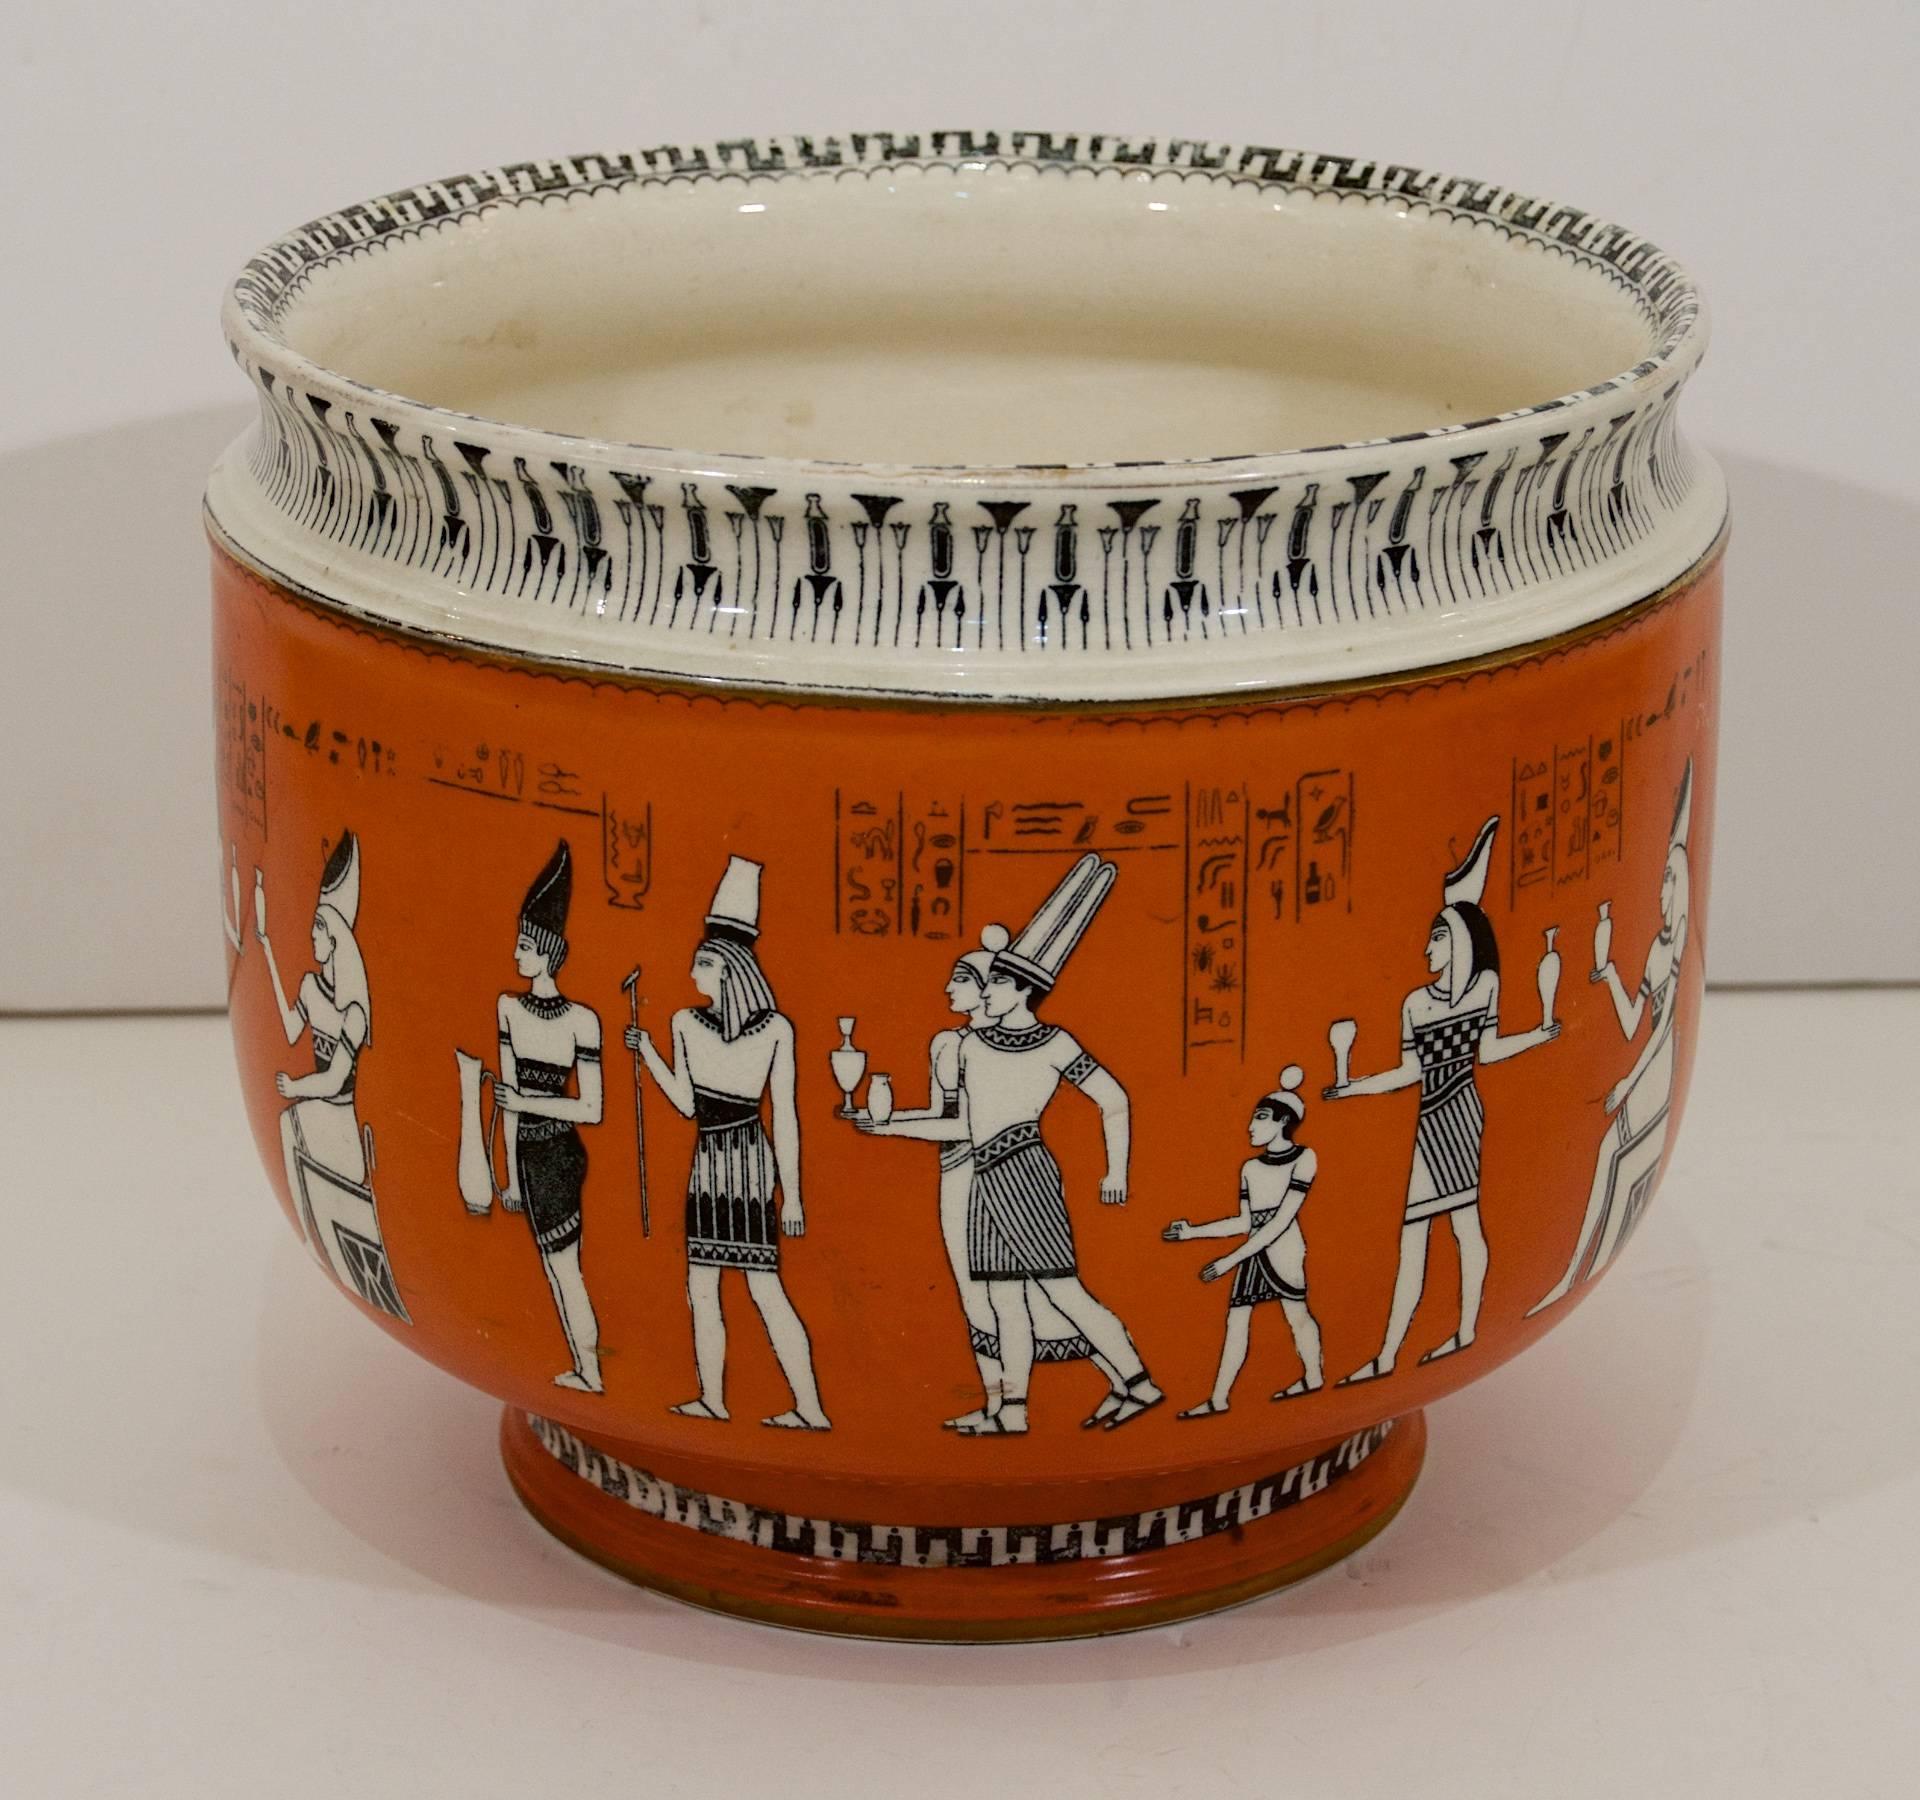 Royal Doulton jardinière made during the Egyptian Revival period.